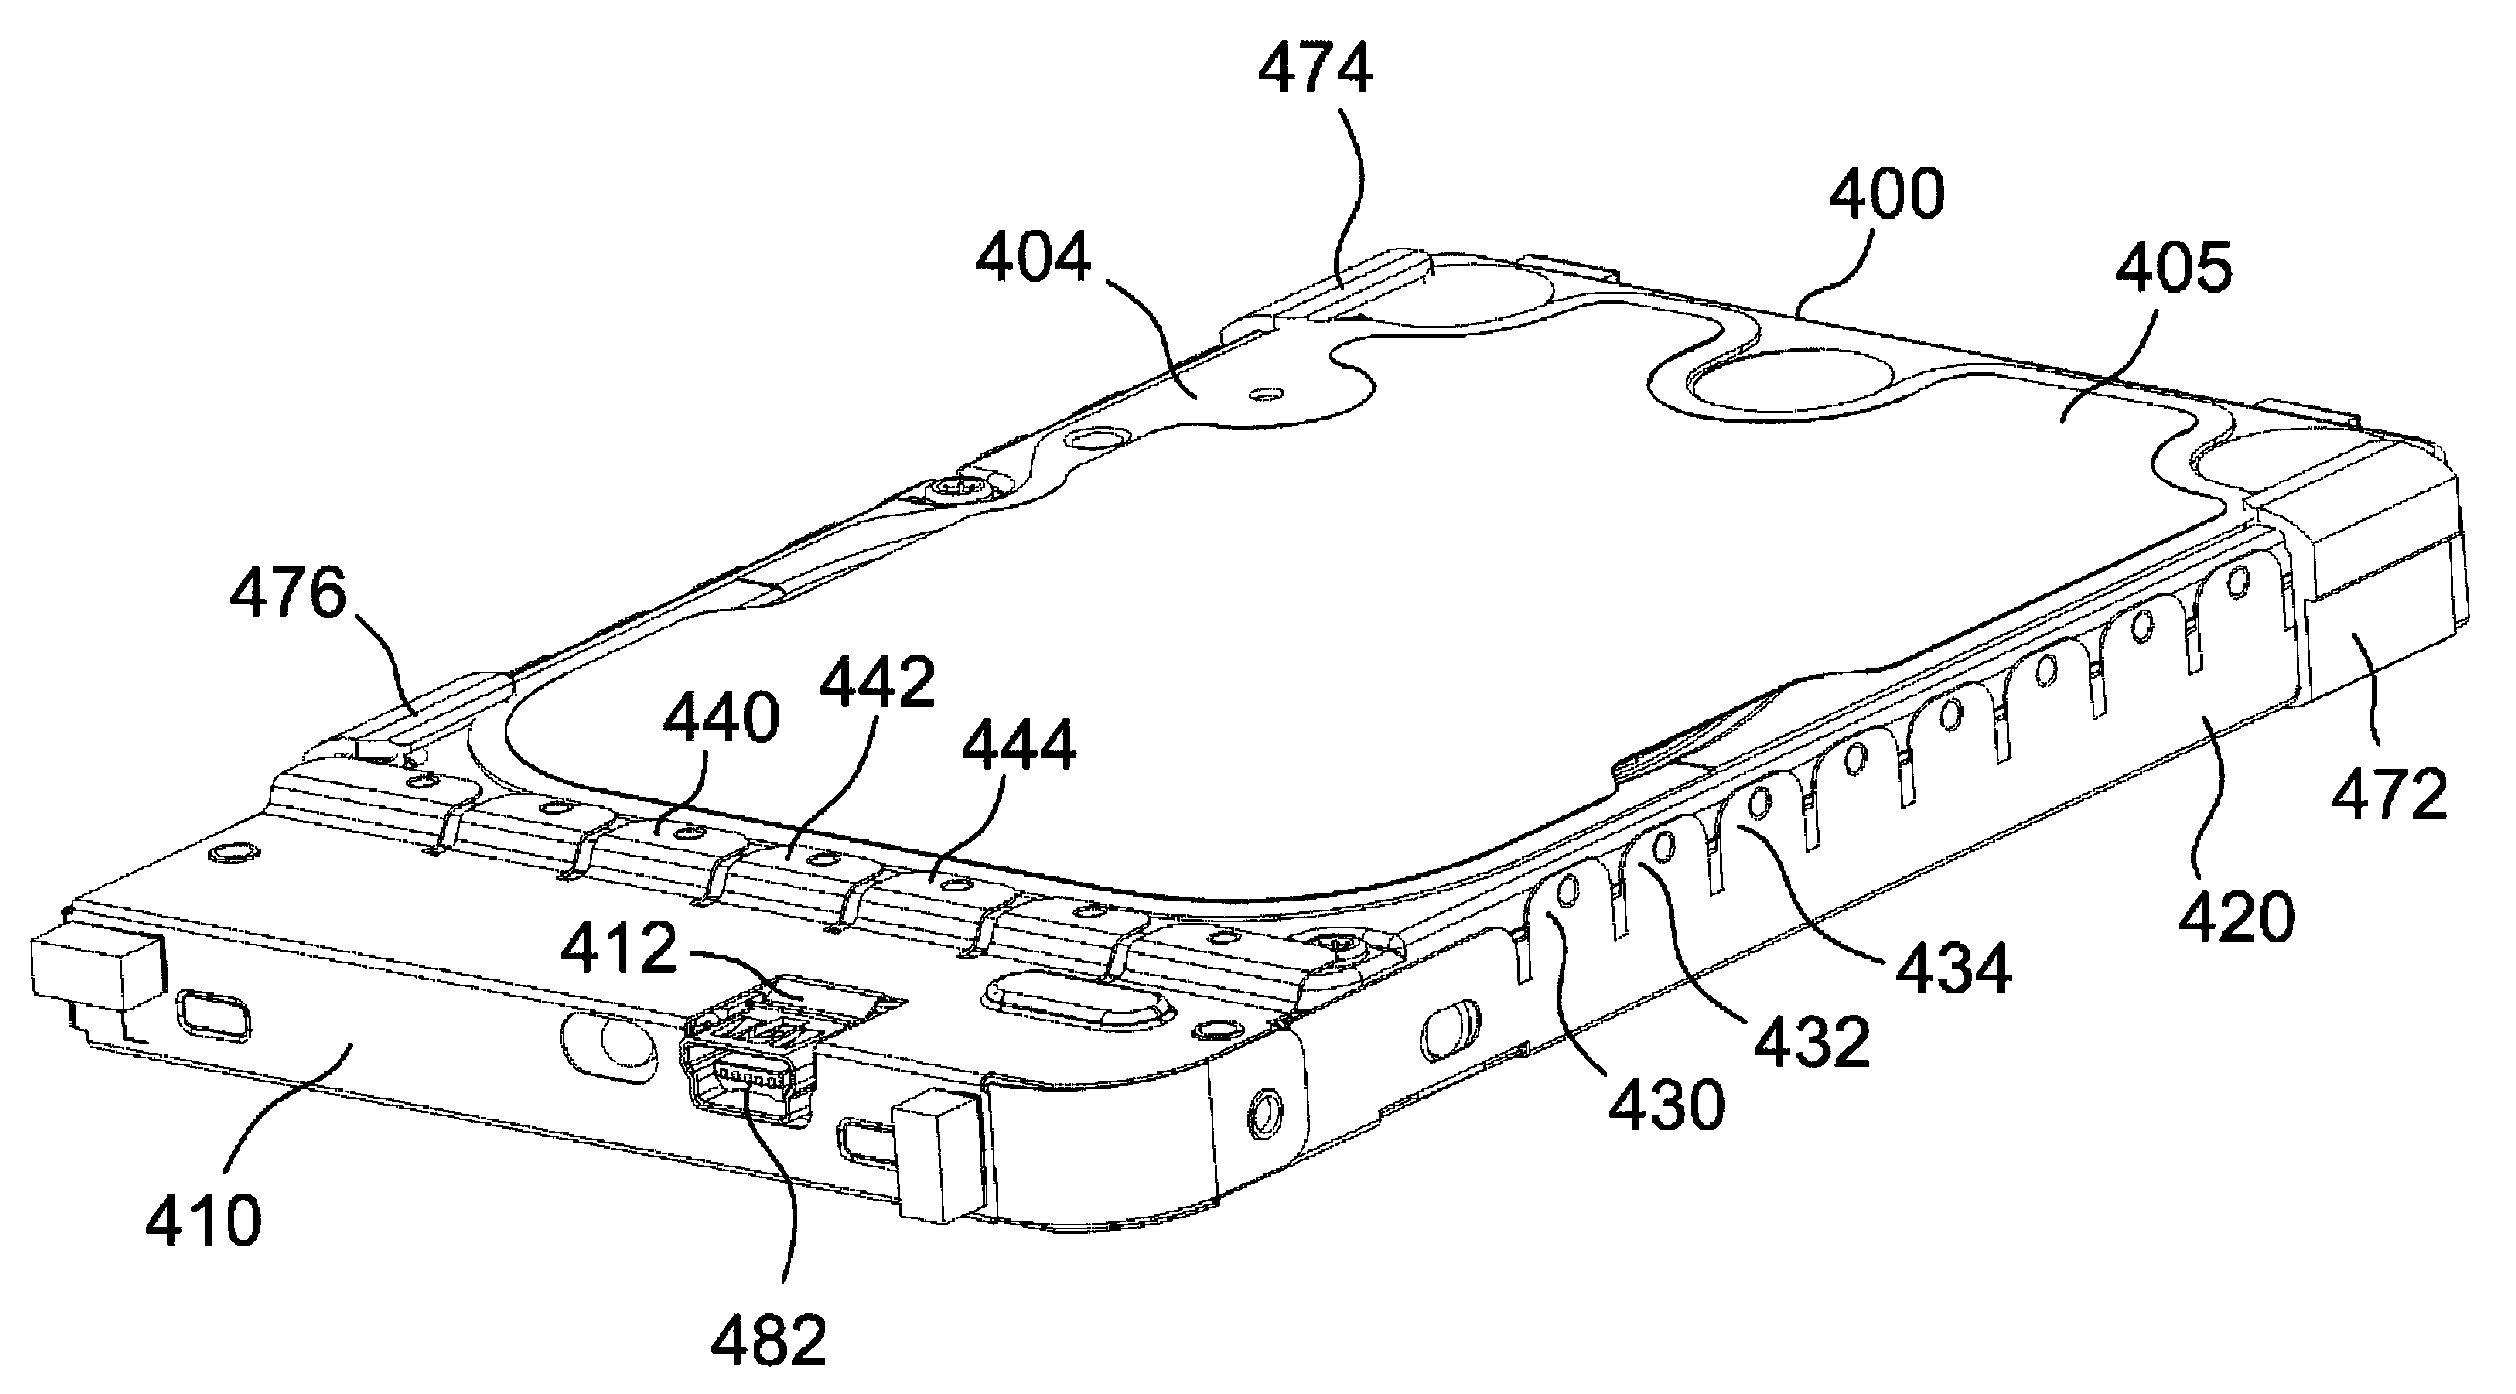 Information storage device having a disk drive and a bridge controller PCB within a monolithic conductive nest